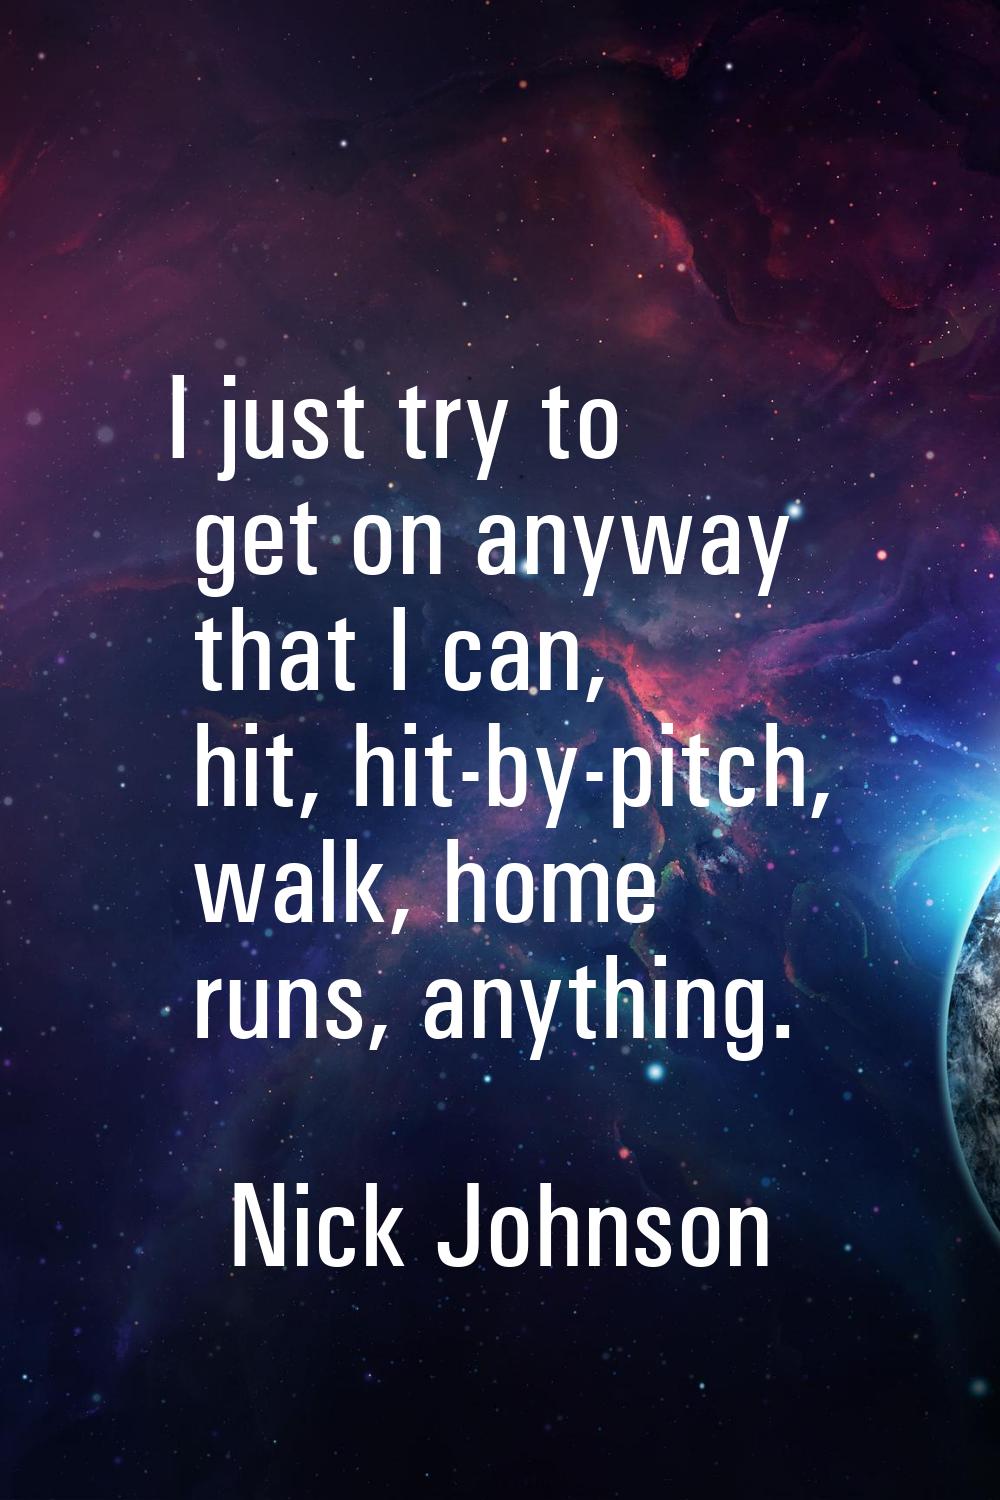 I just try to get on anyway that I can, hit, hit-by-pitch, walk, home runs, anything.